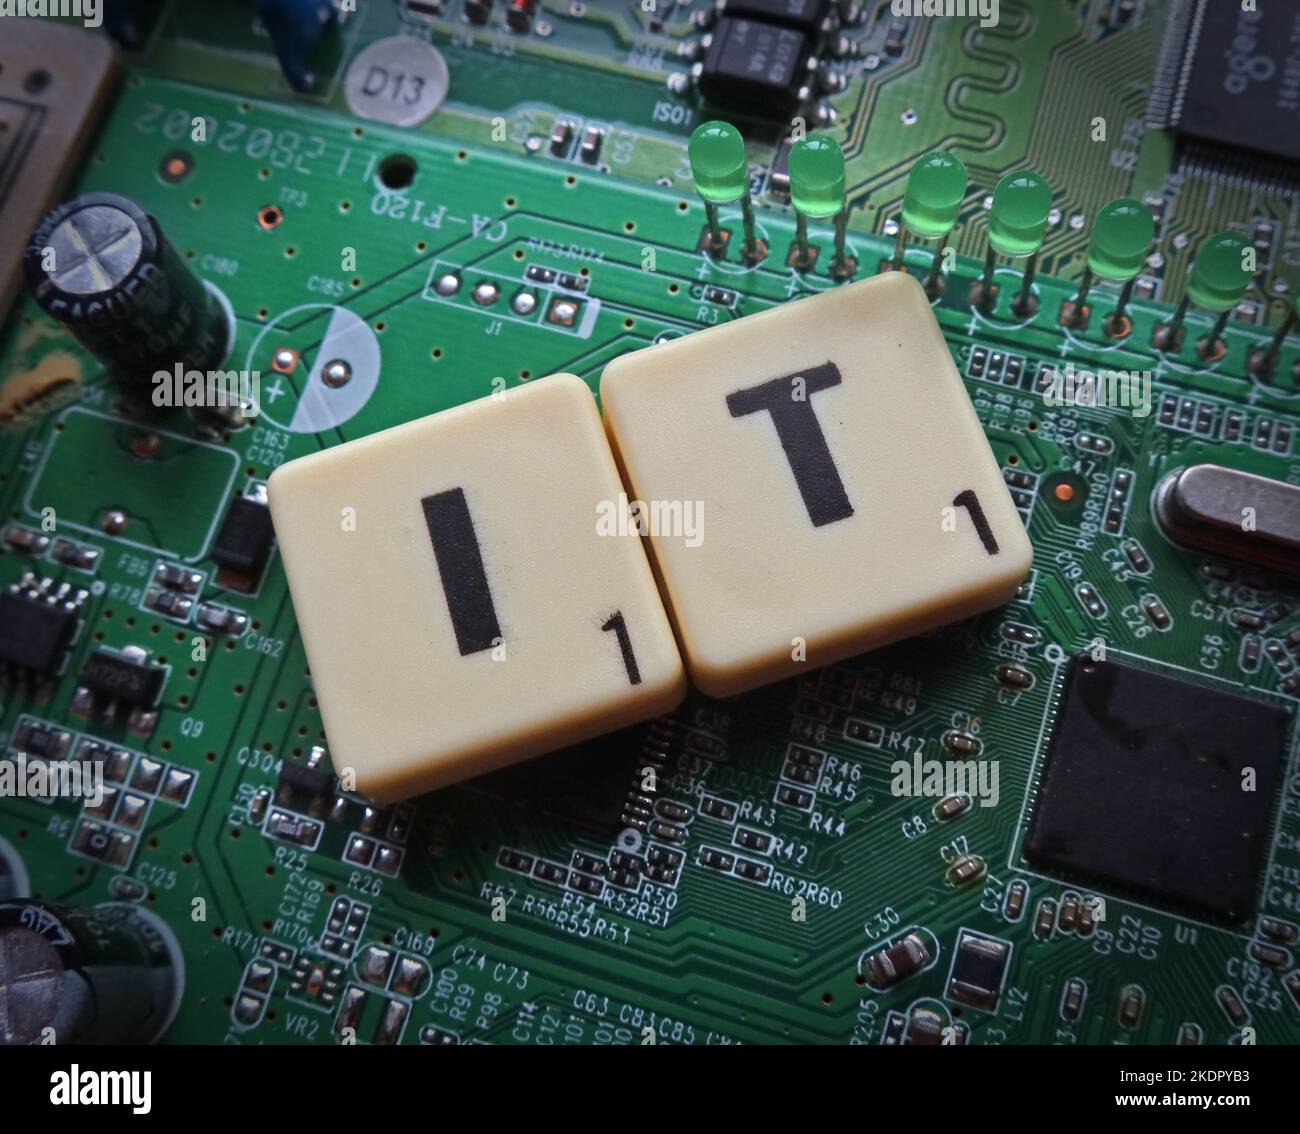 IT - Information Technology - Scrabble letters / word on a electronic PCB Stock Photo